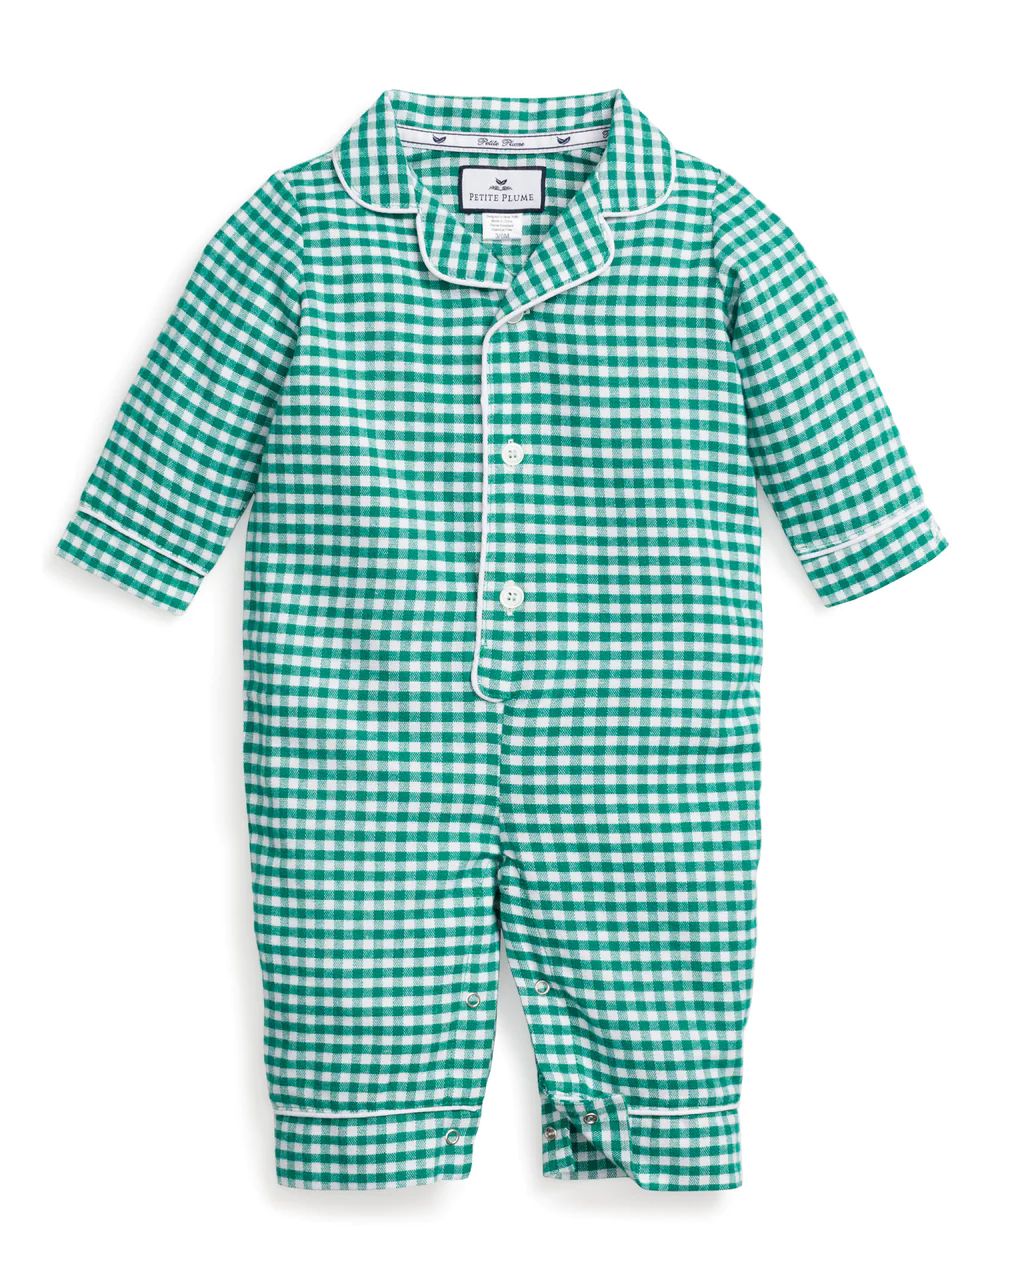 Green Gingham Flannel Romper with White Piping | Petite Plume